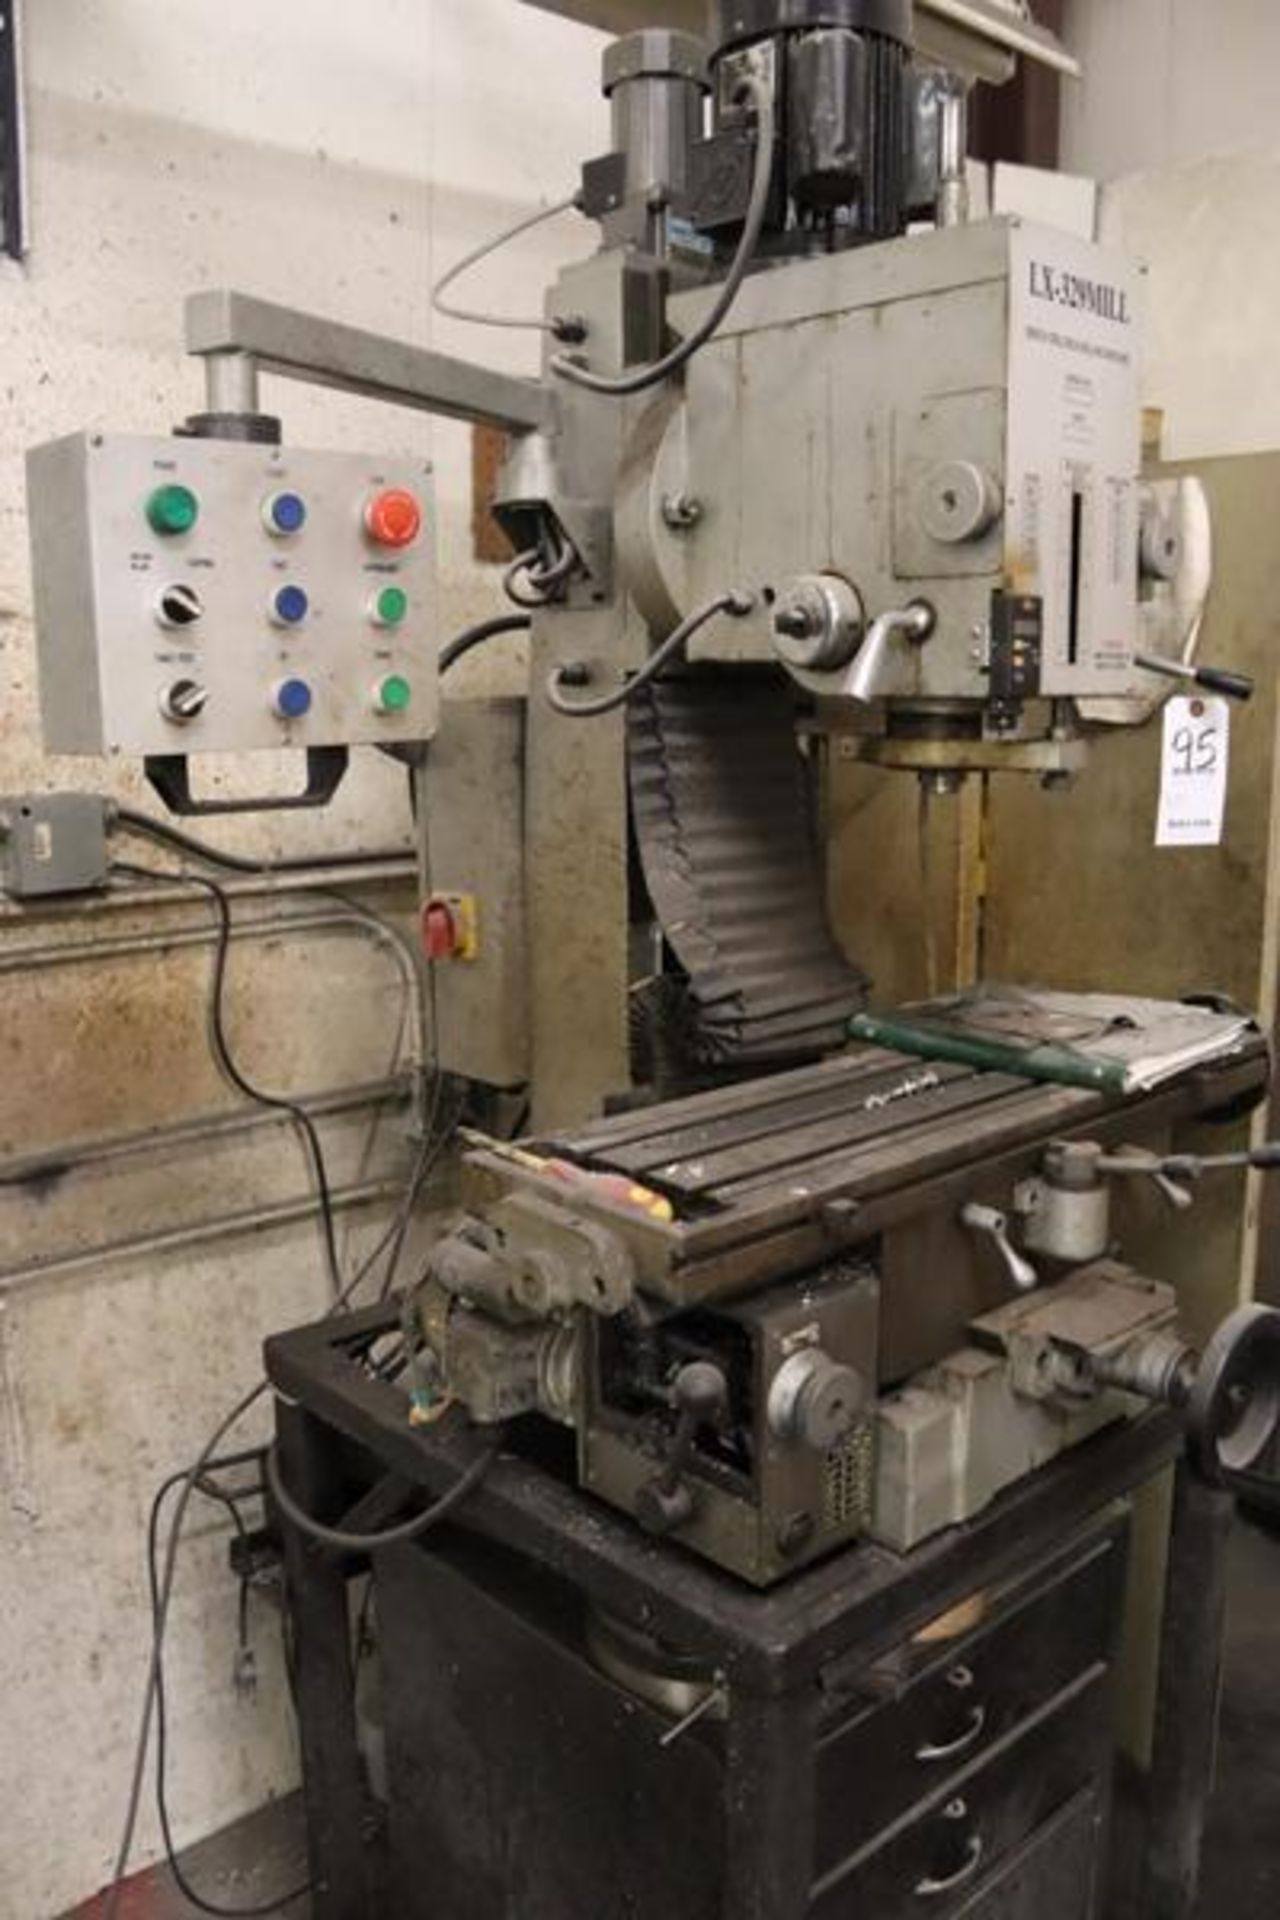 LX-329 Mill Bench Drilling and Milling Machine S/N#6048, 9"x31" Table - Image 2 of 3